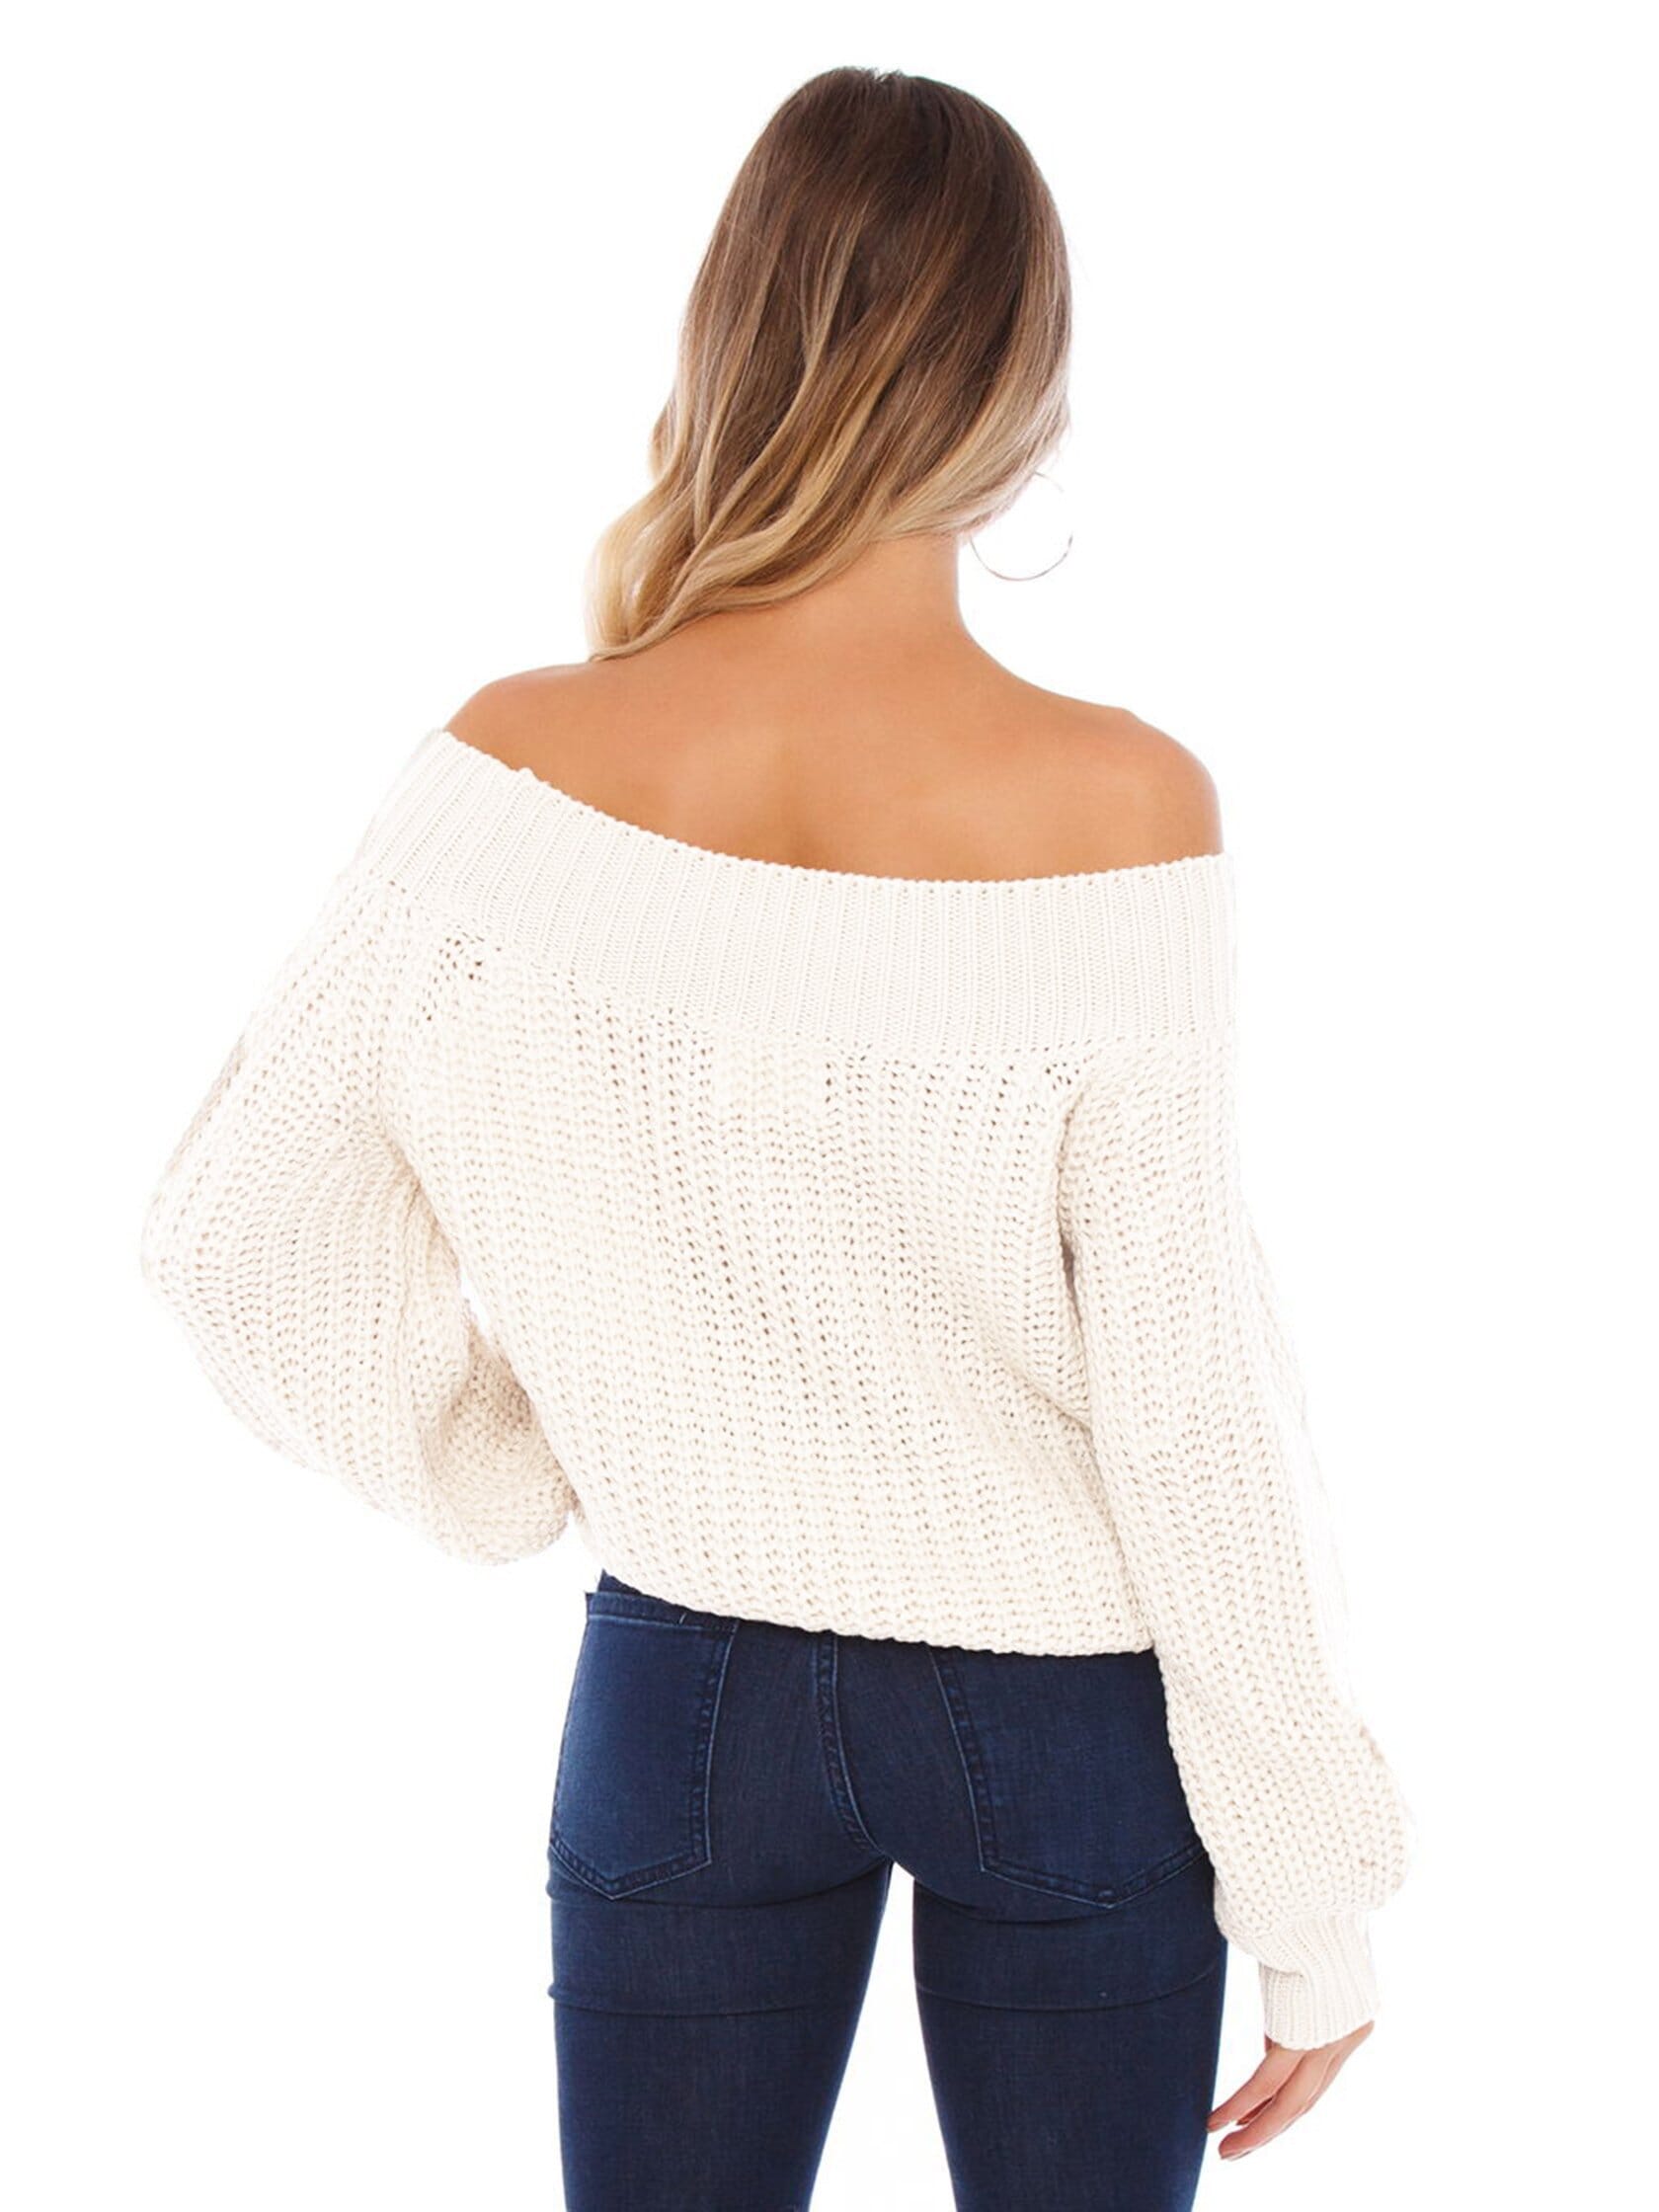 FashionPass Chrissy Off Shoulder Sweater in Ivory